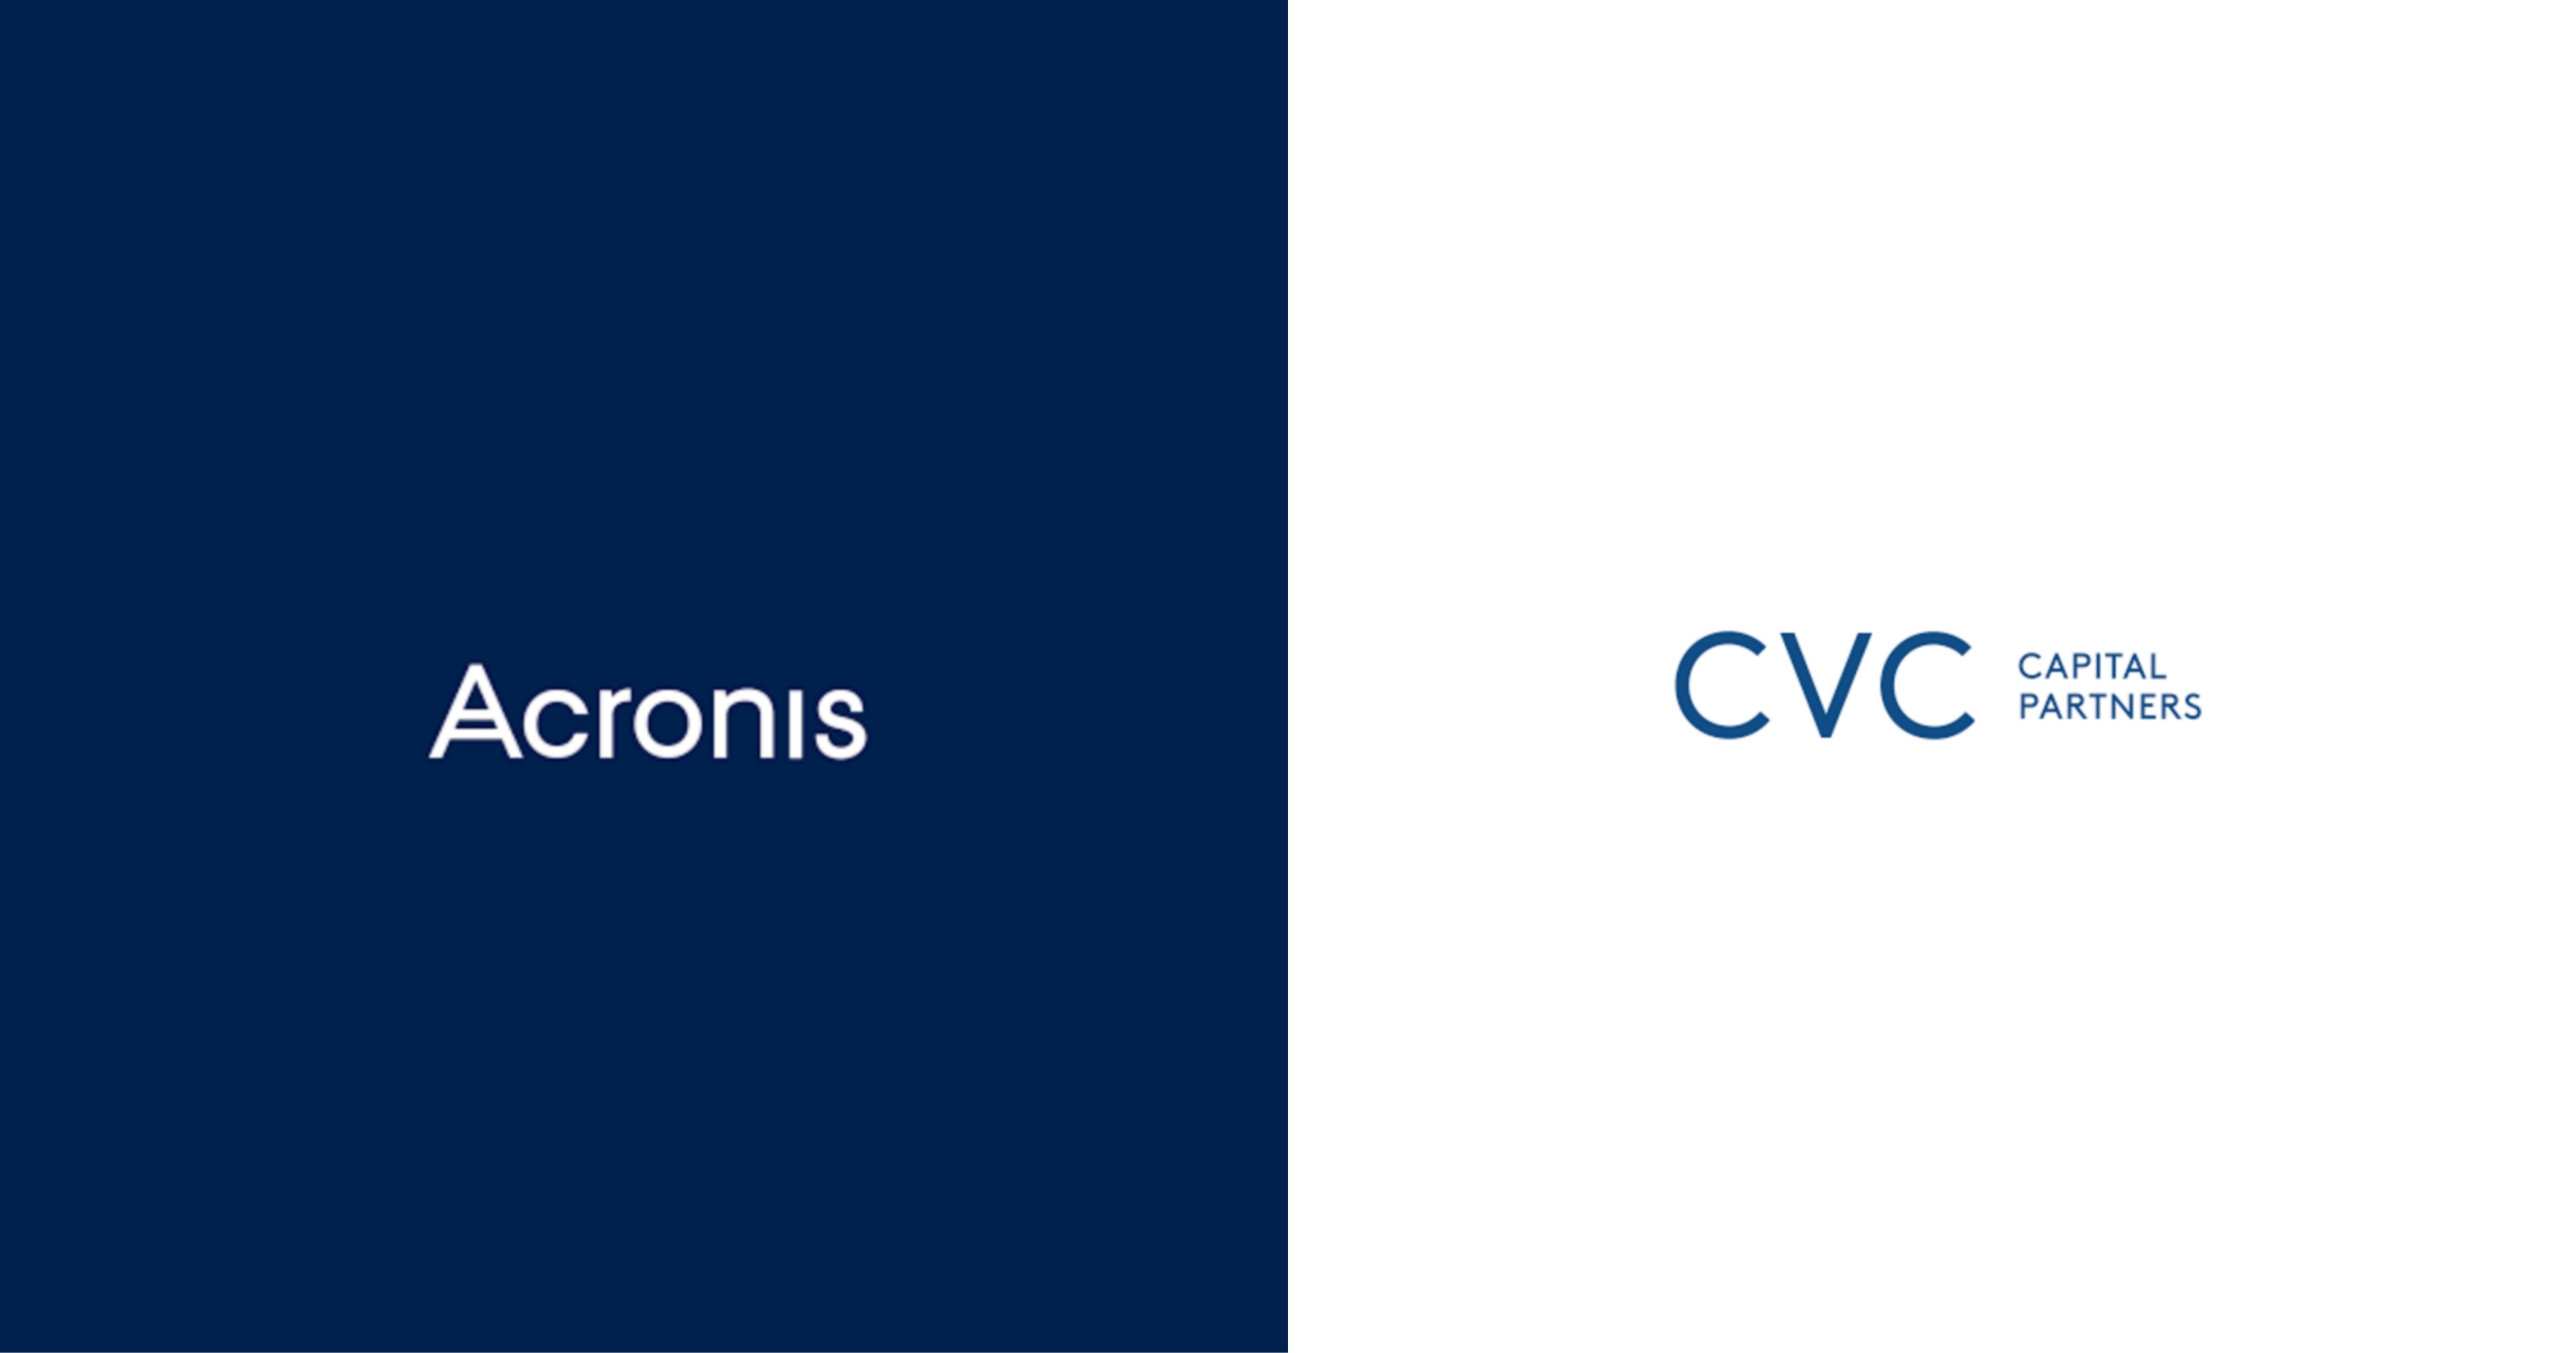 Acronis, the Global Leader in Cyber Protection, Receives More Than $250M Investment at a $2.5B Valuation